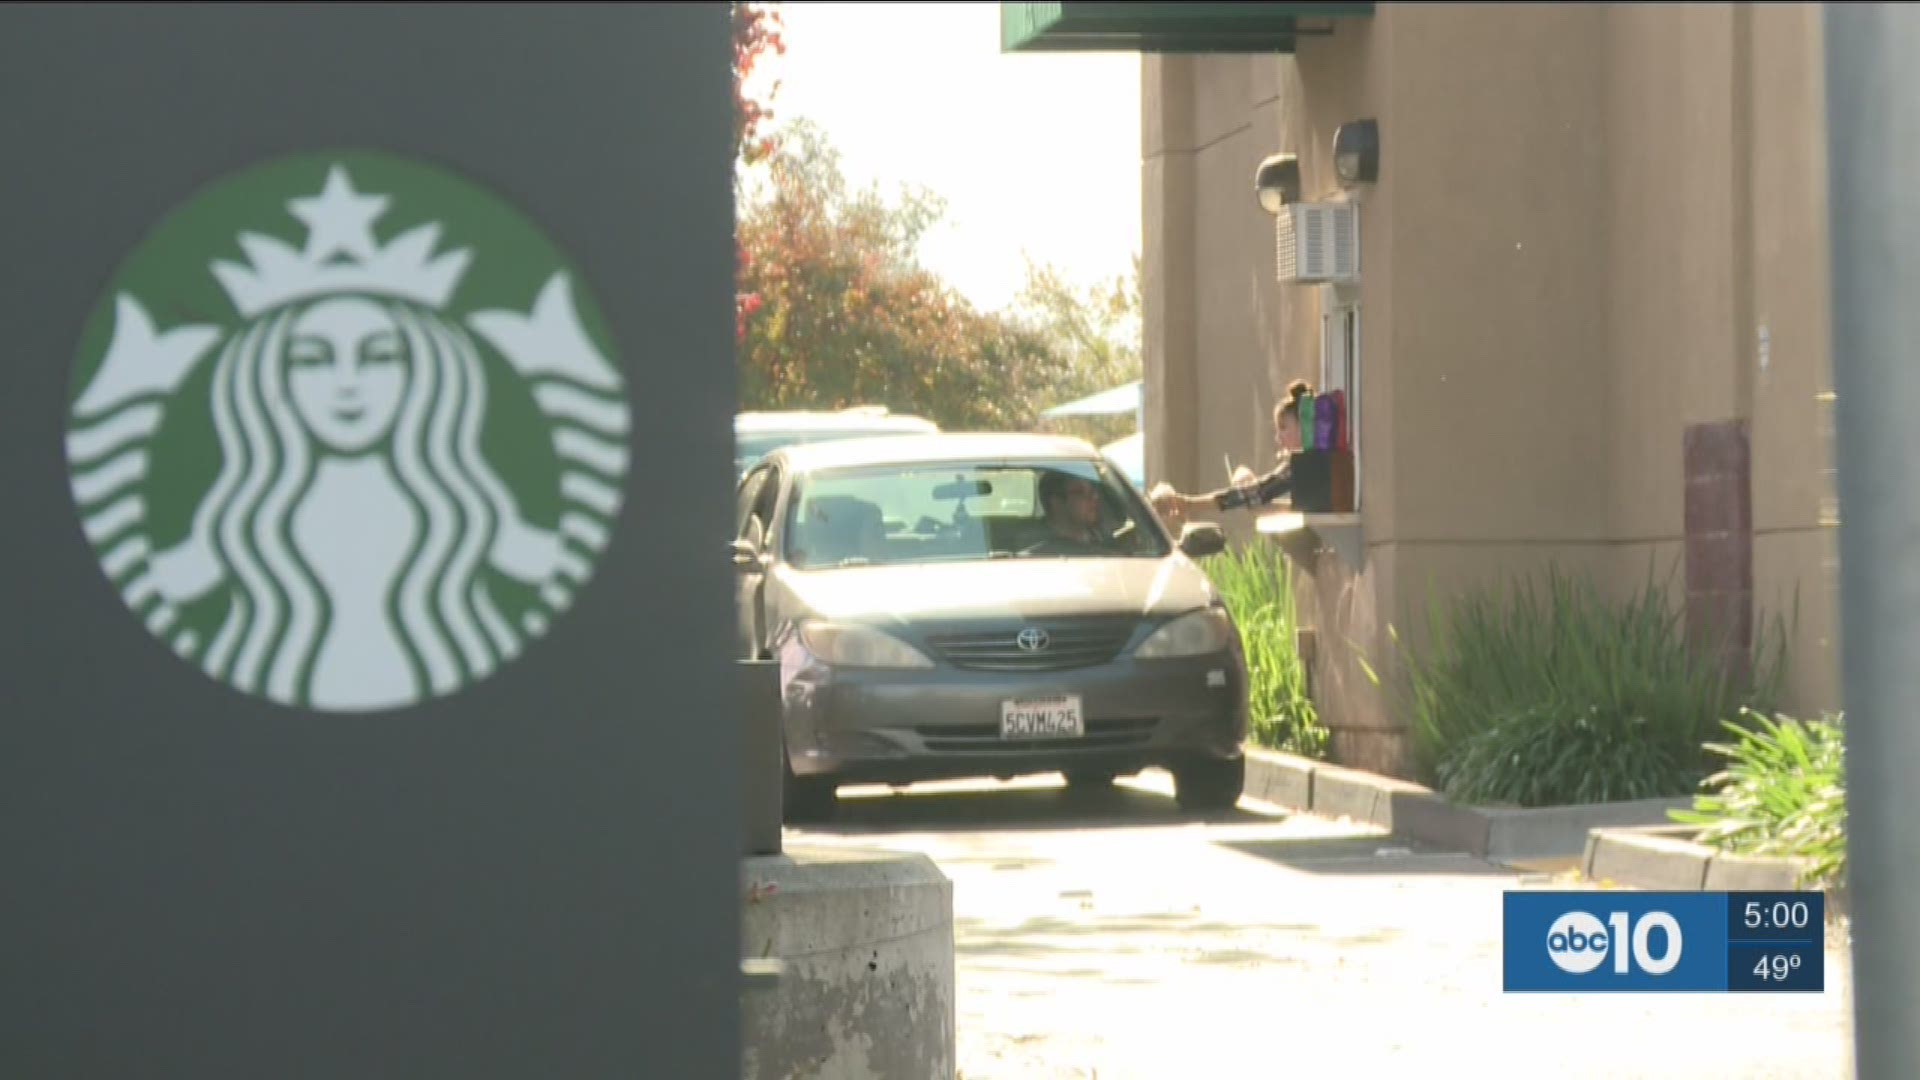 Photos taken by a barista at a Starbucks in Elk Grove showing trash and a dirty steam wand goes viral. (Nov. 29, 2016)